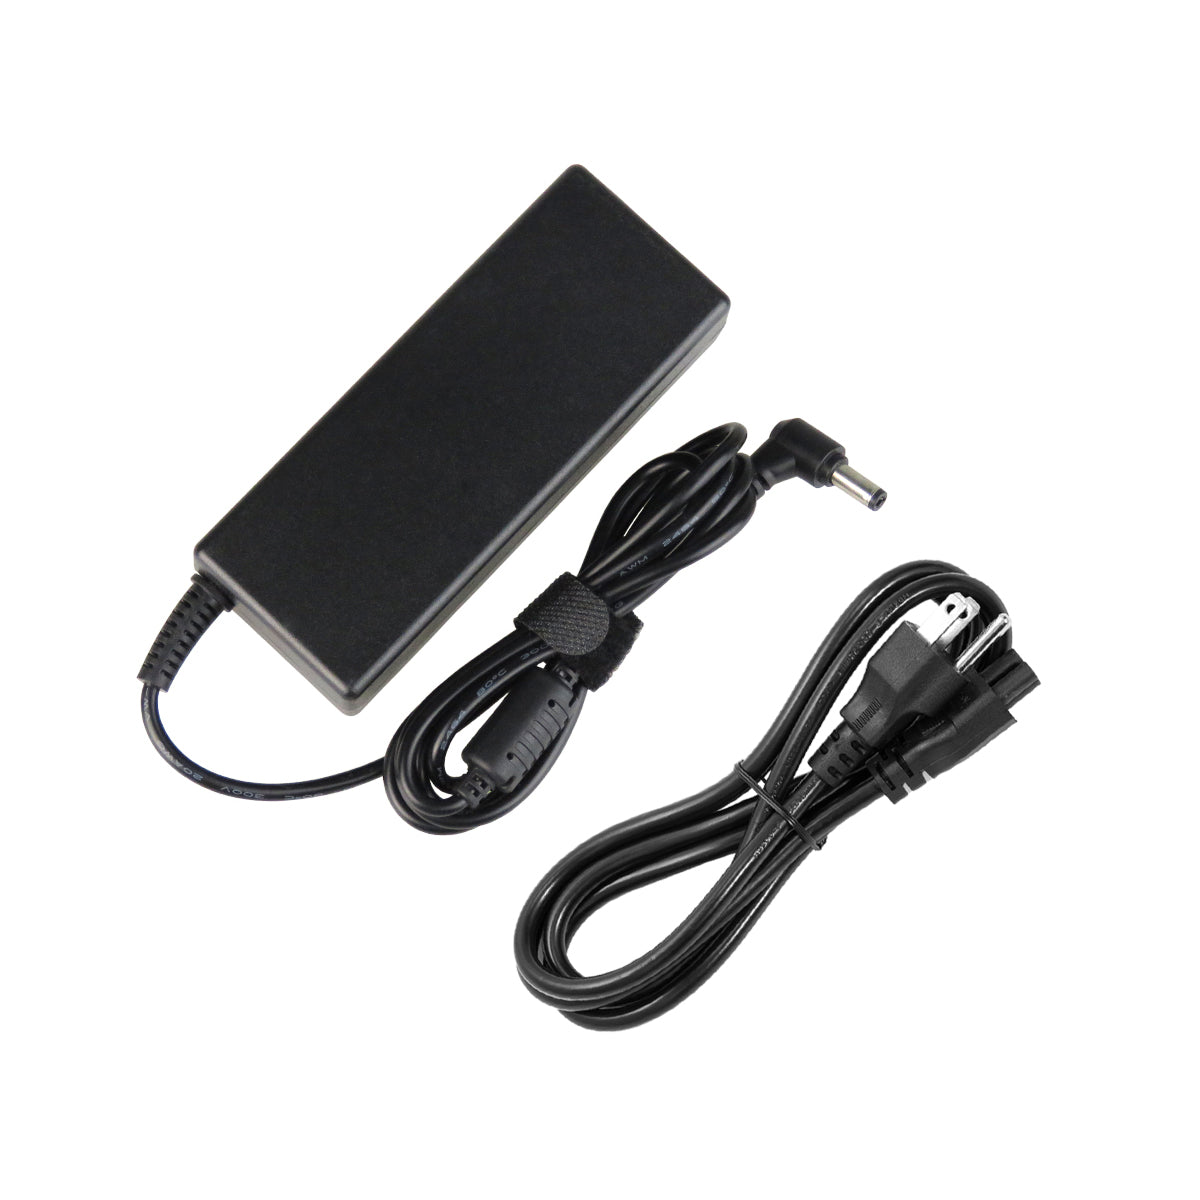 AC Adapter Charger for ASUS K45 Notebook.